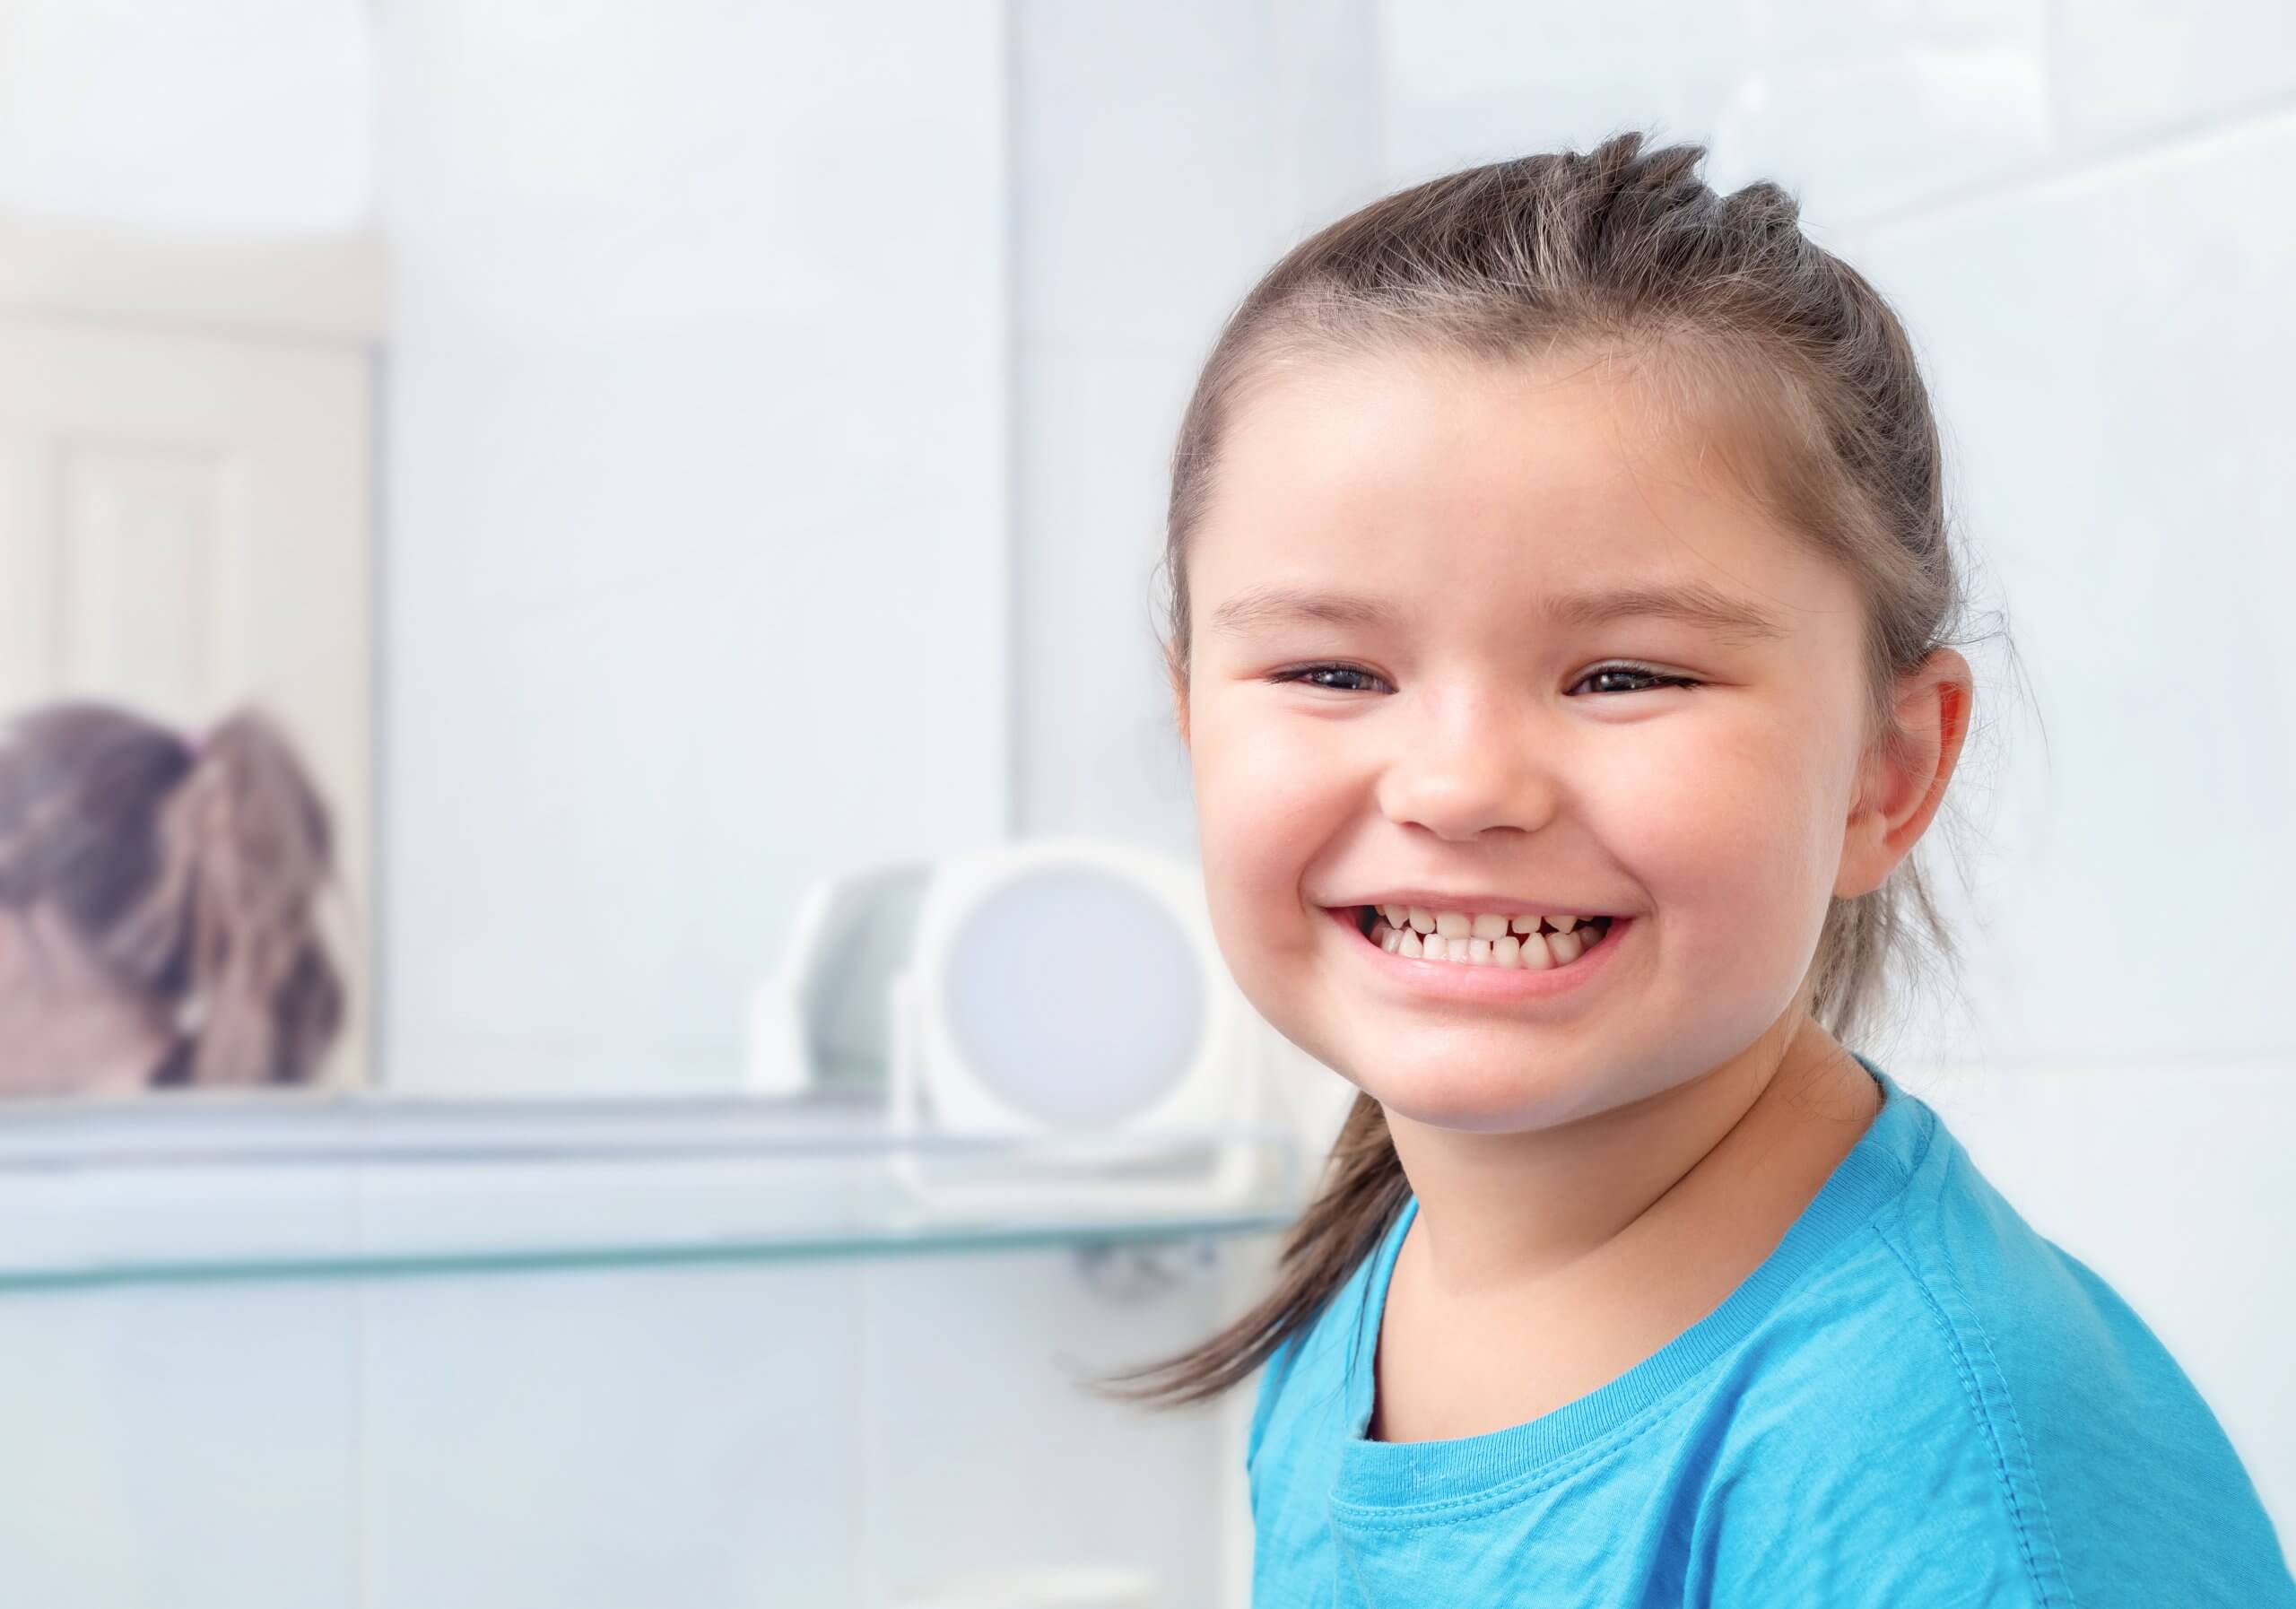 Why The Trend of Teeth Whitening For Kids Needs to Be More Carefully Thought Out